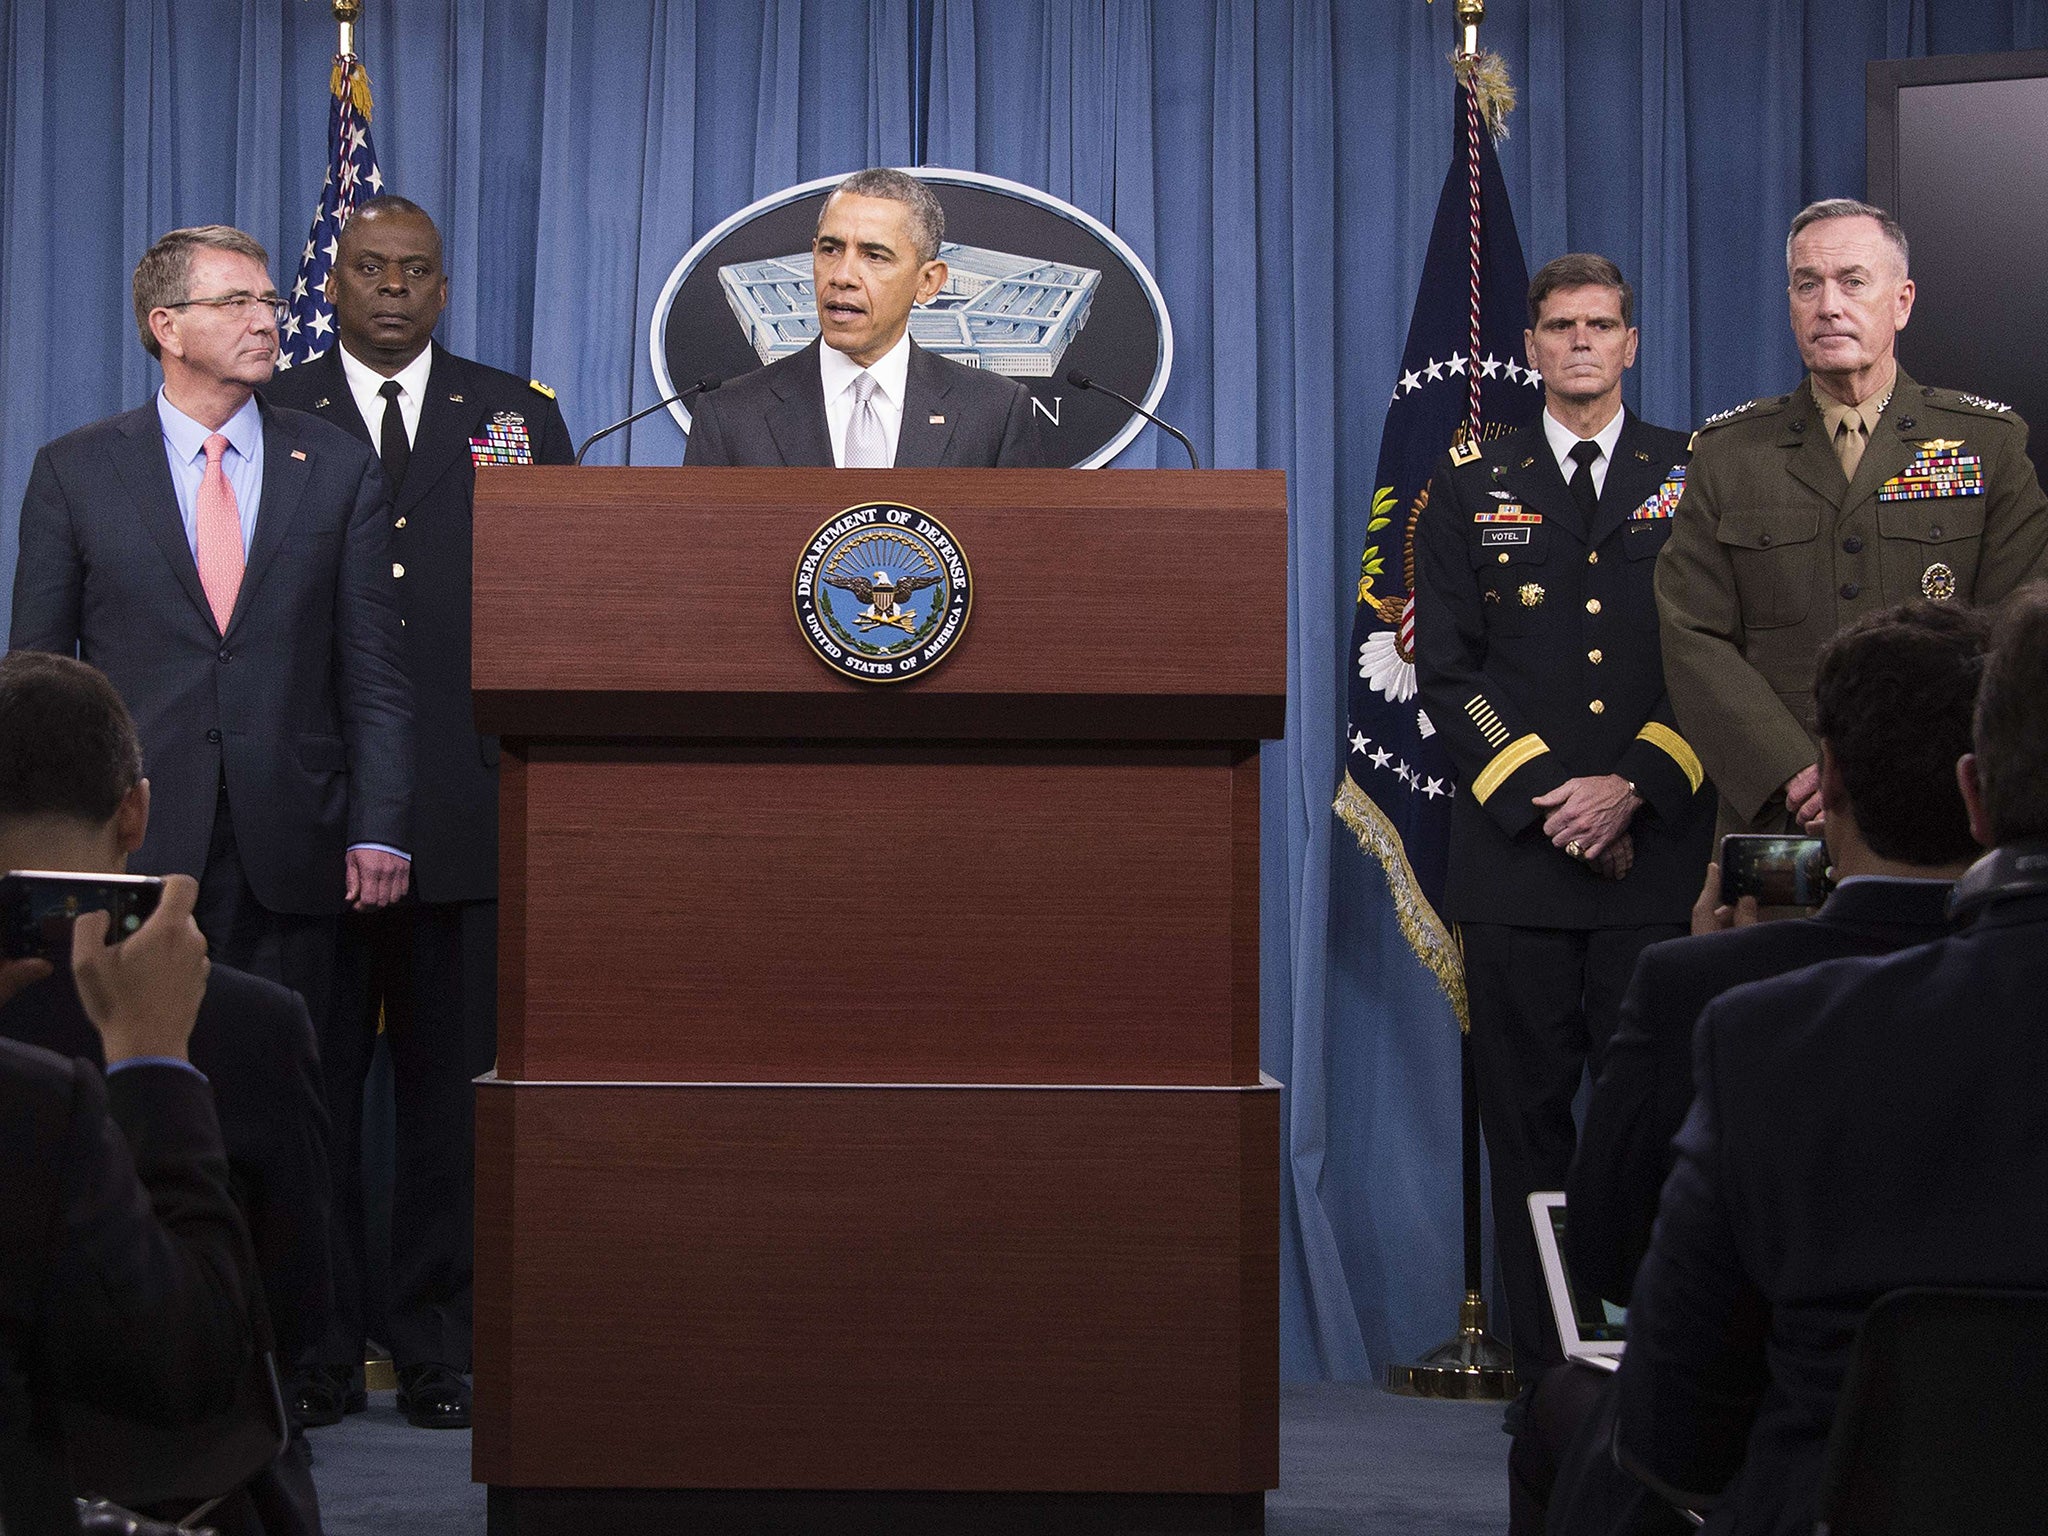 US President Barack Obama, center, speaks to reporters following a National Security Council meeting on the counter-ISIL at the Pentagon. Looking on from left - right are; US Secretary of Defense Ashton Carter, US Central Command Commander General Joseph Austin, US Special Operations Commander General Joseph Votel and Chairman of the Joint Chiefs General Joseph Dunford